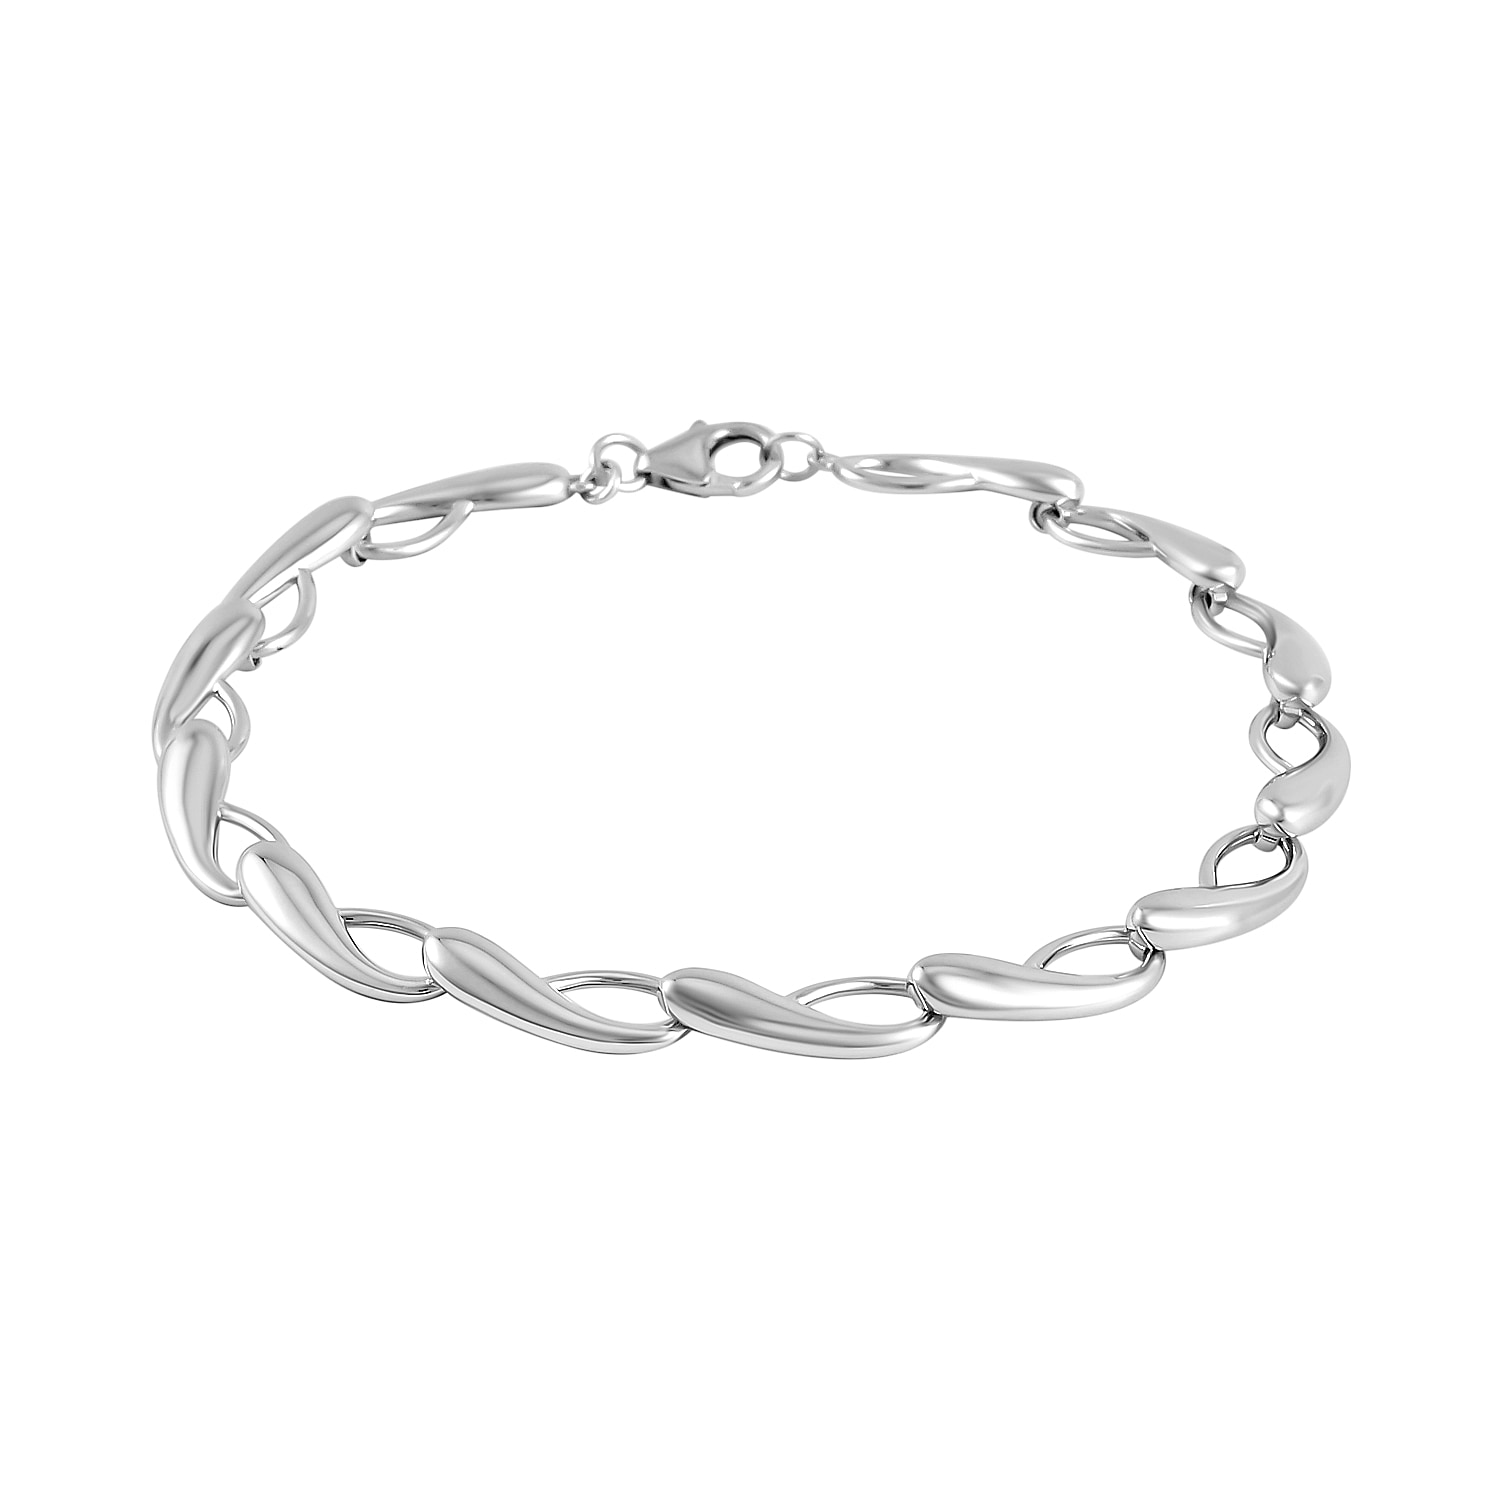 Lucy Q Drip Collection - Rhodium Overlay Sterling Silver Bracelet (Size - 8), Silver Wt. 17 Gms